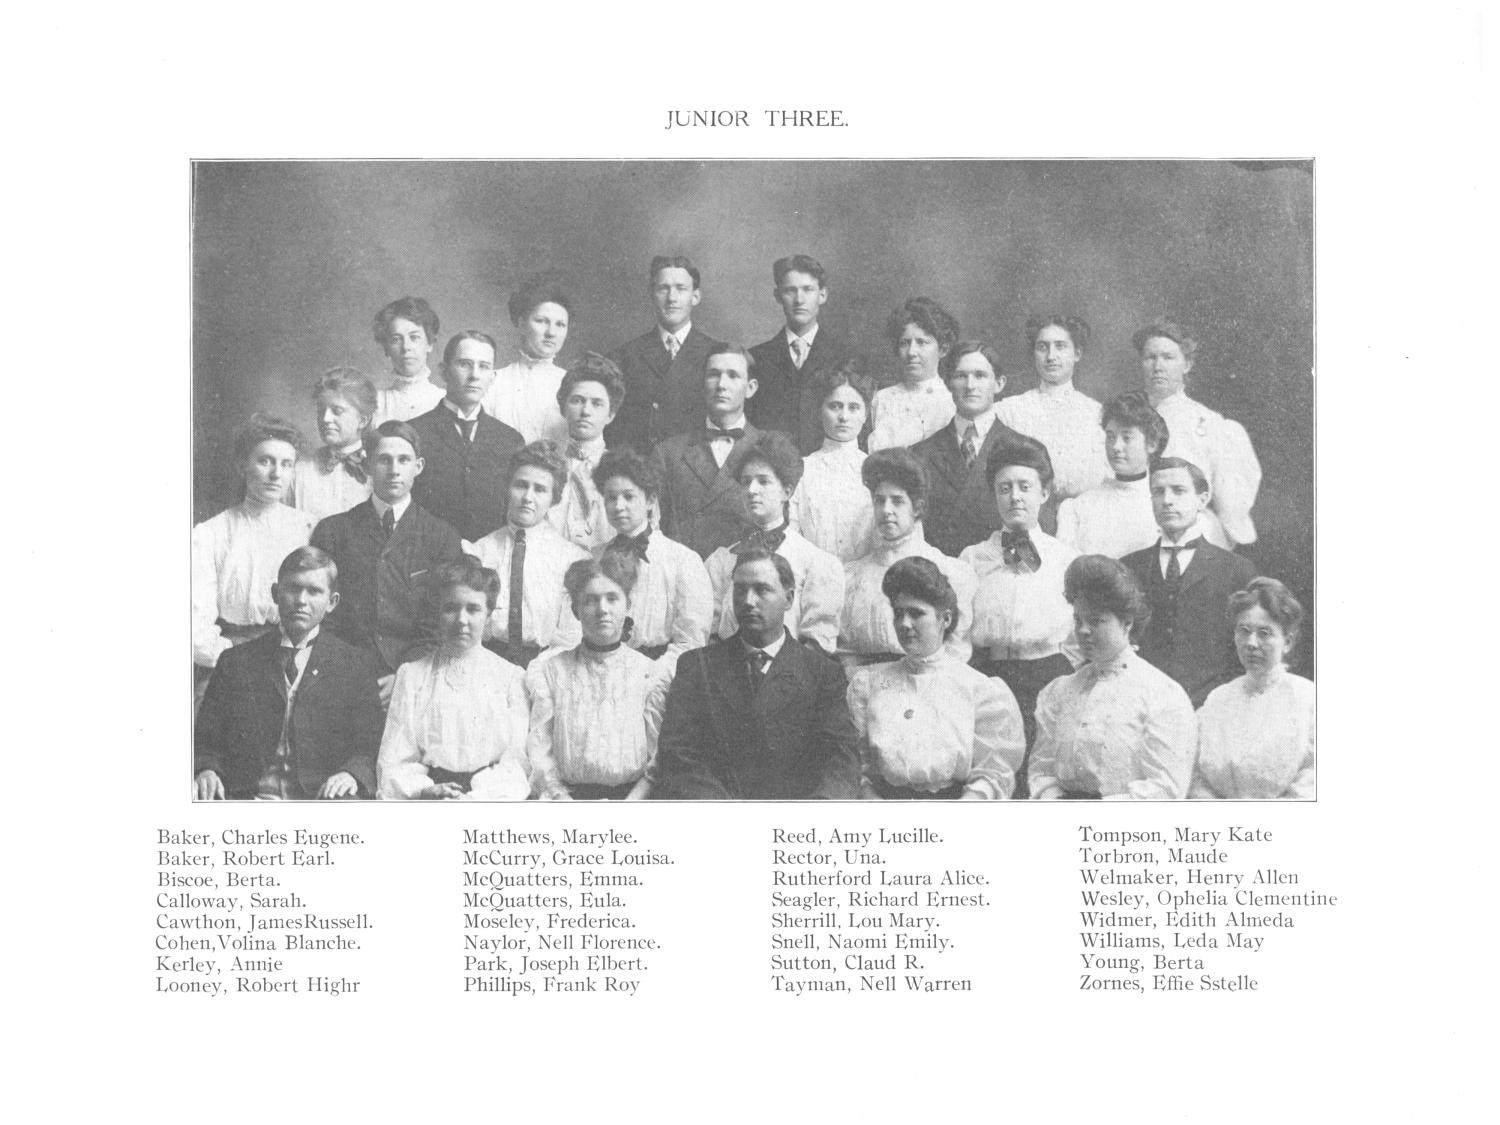 The Yucca, Yearbook of North Texas State Normal School, 1907
                                                
                                                    38
                                                